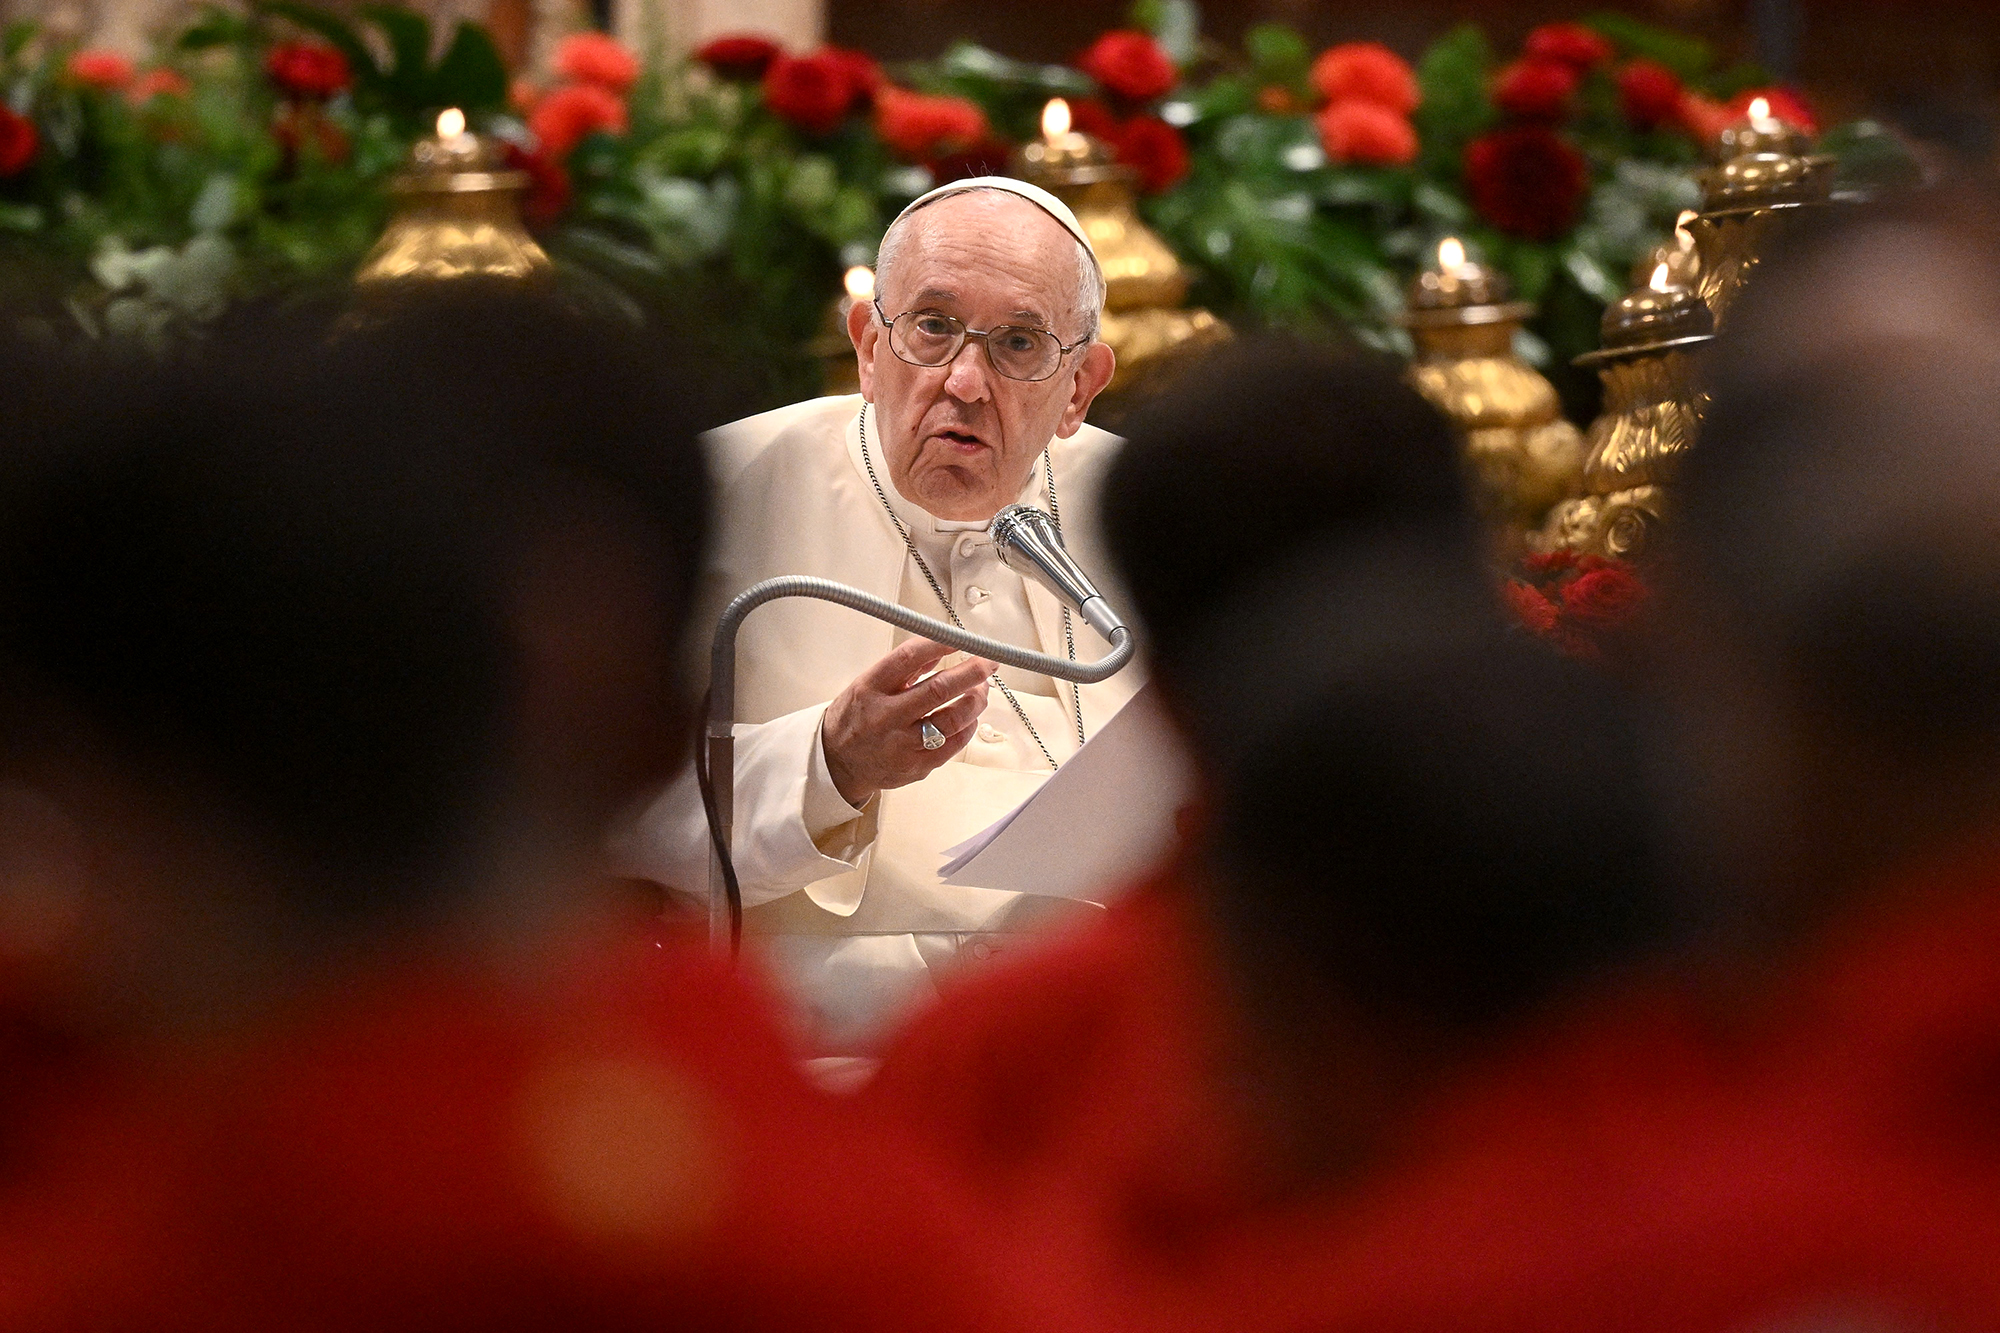 Pope Francis appeals to government leaders on Ukraine: “Please do not bring humanity to ruin”